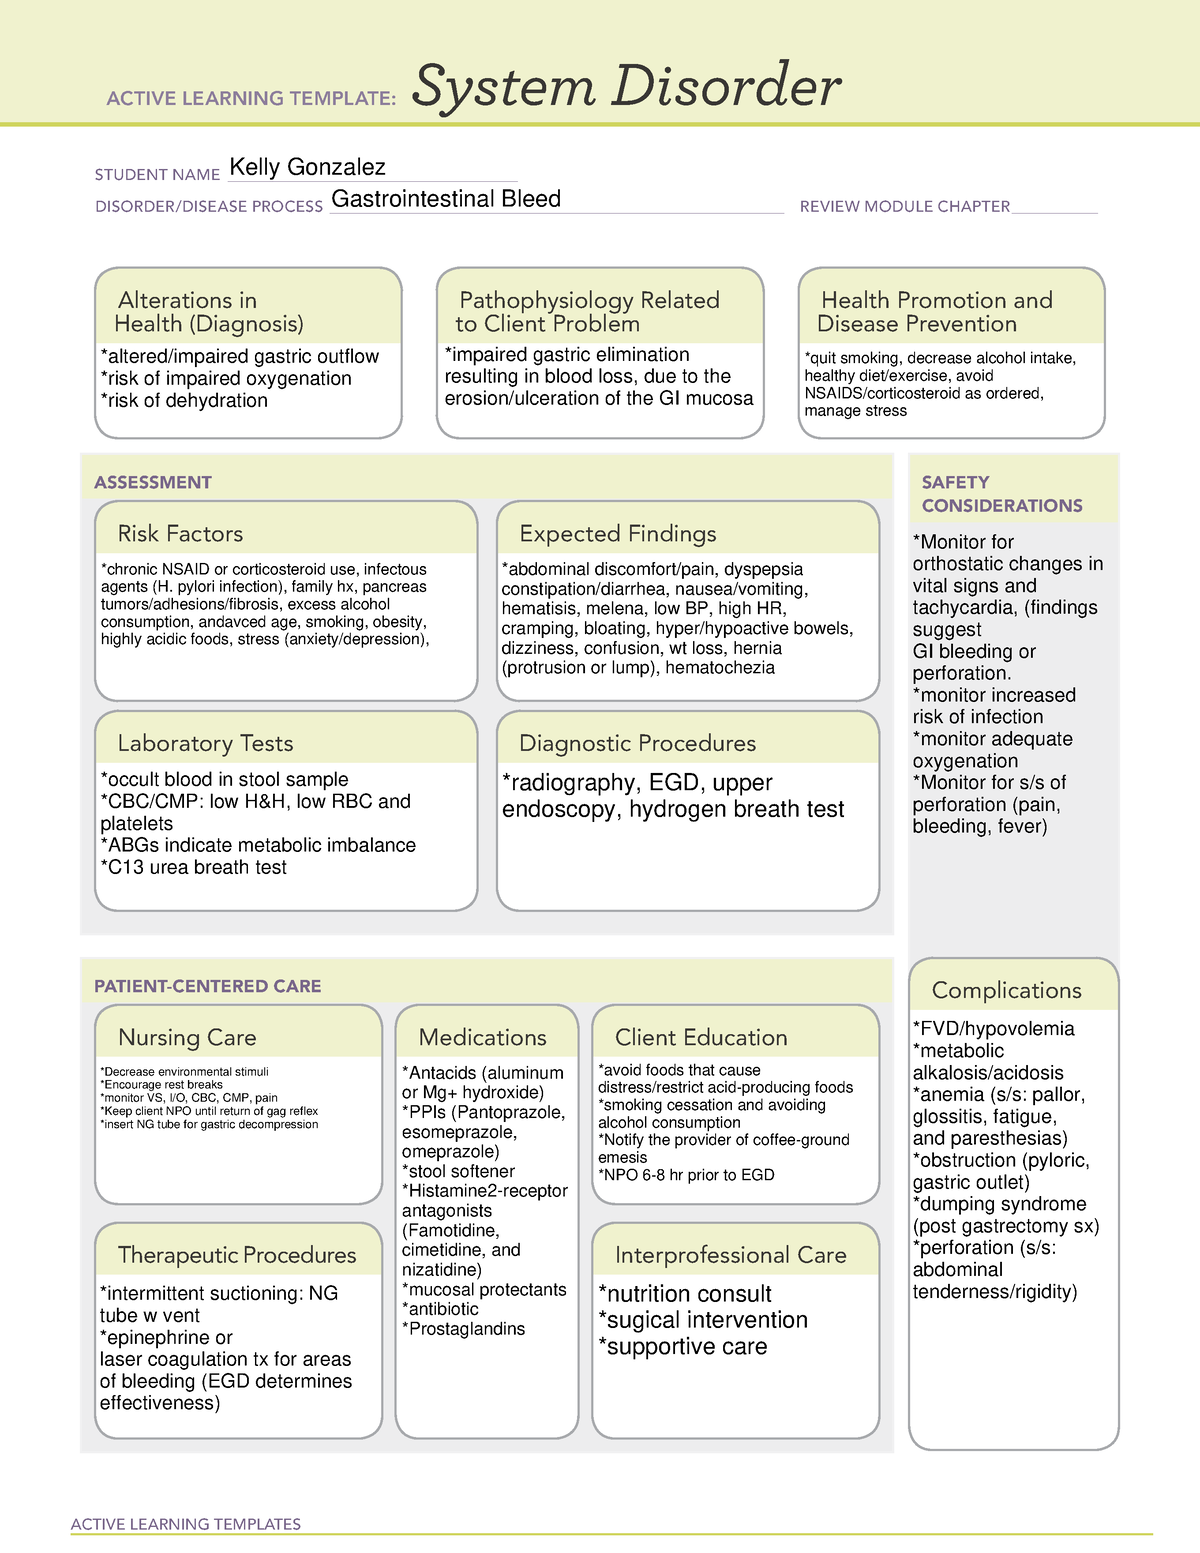 system-disorder-gi-bleed-active-learning-templates-system-disorder